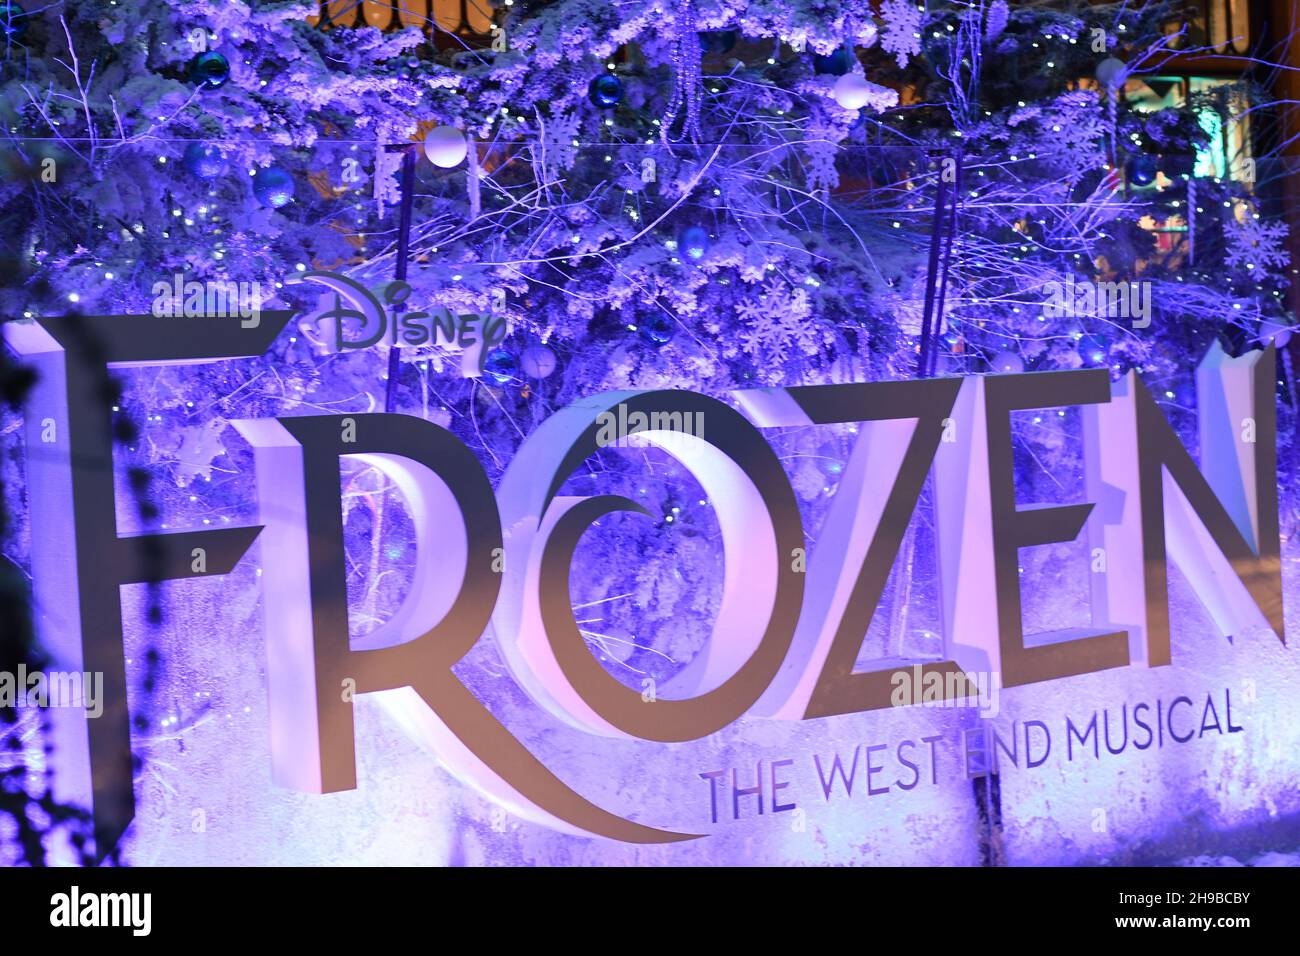 Disney's Frozen large sign advertising the west end musical with a wintery scene behind it Stock Photo